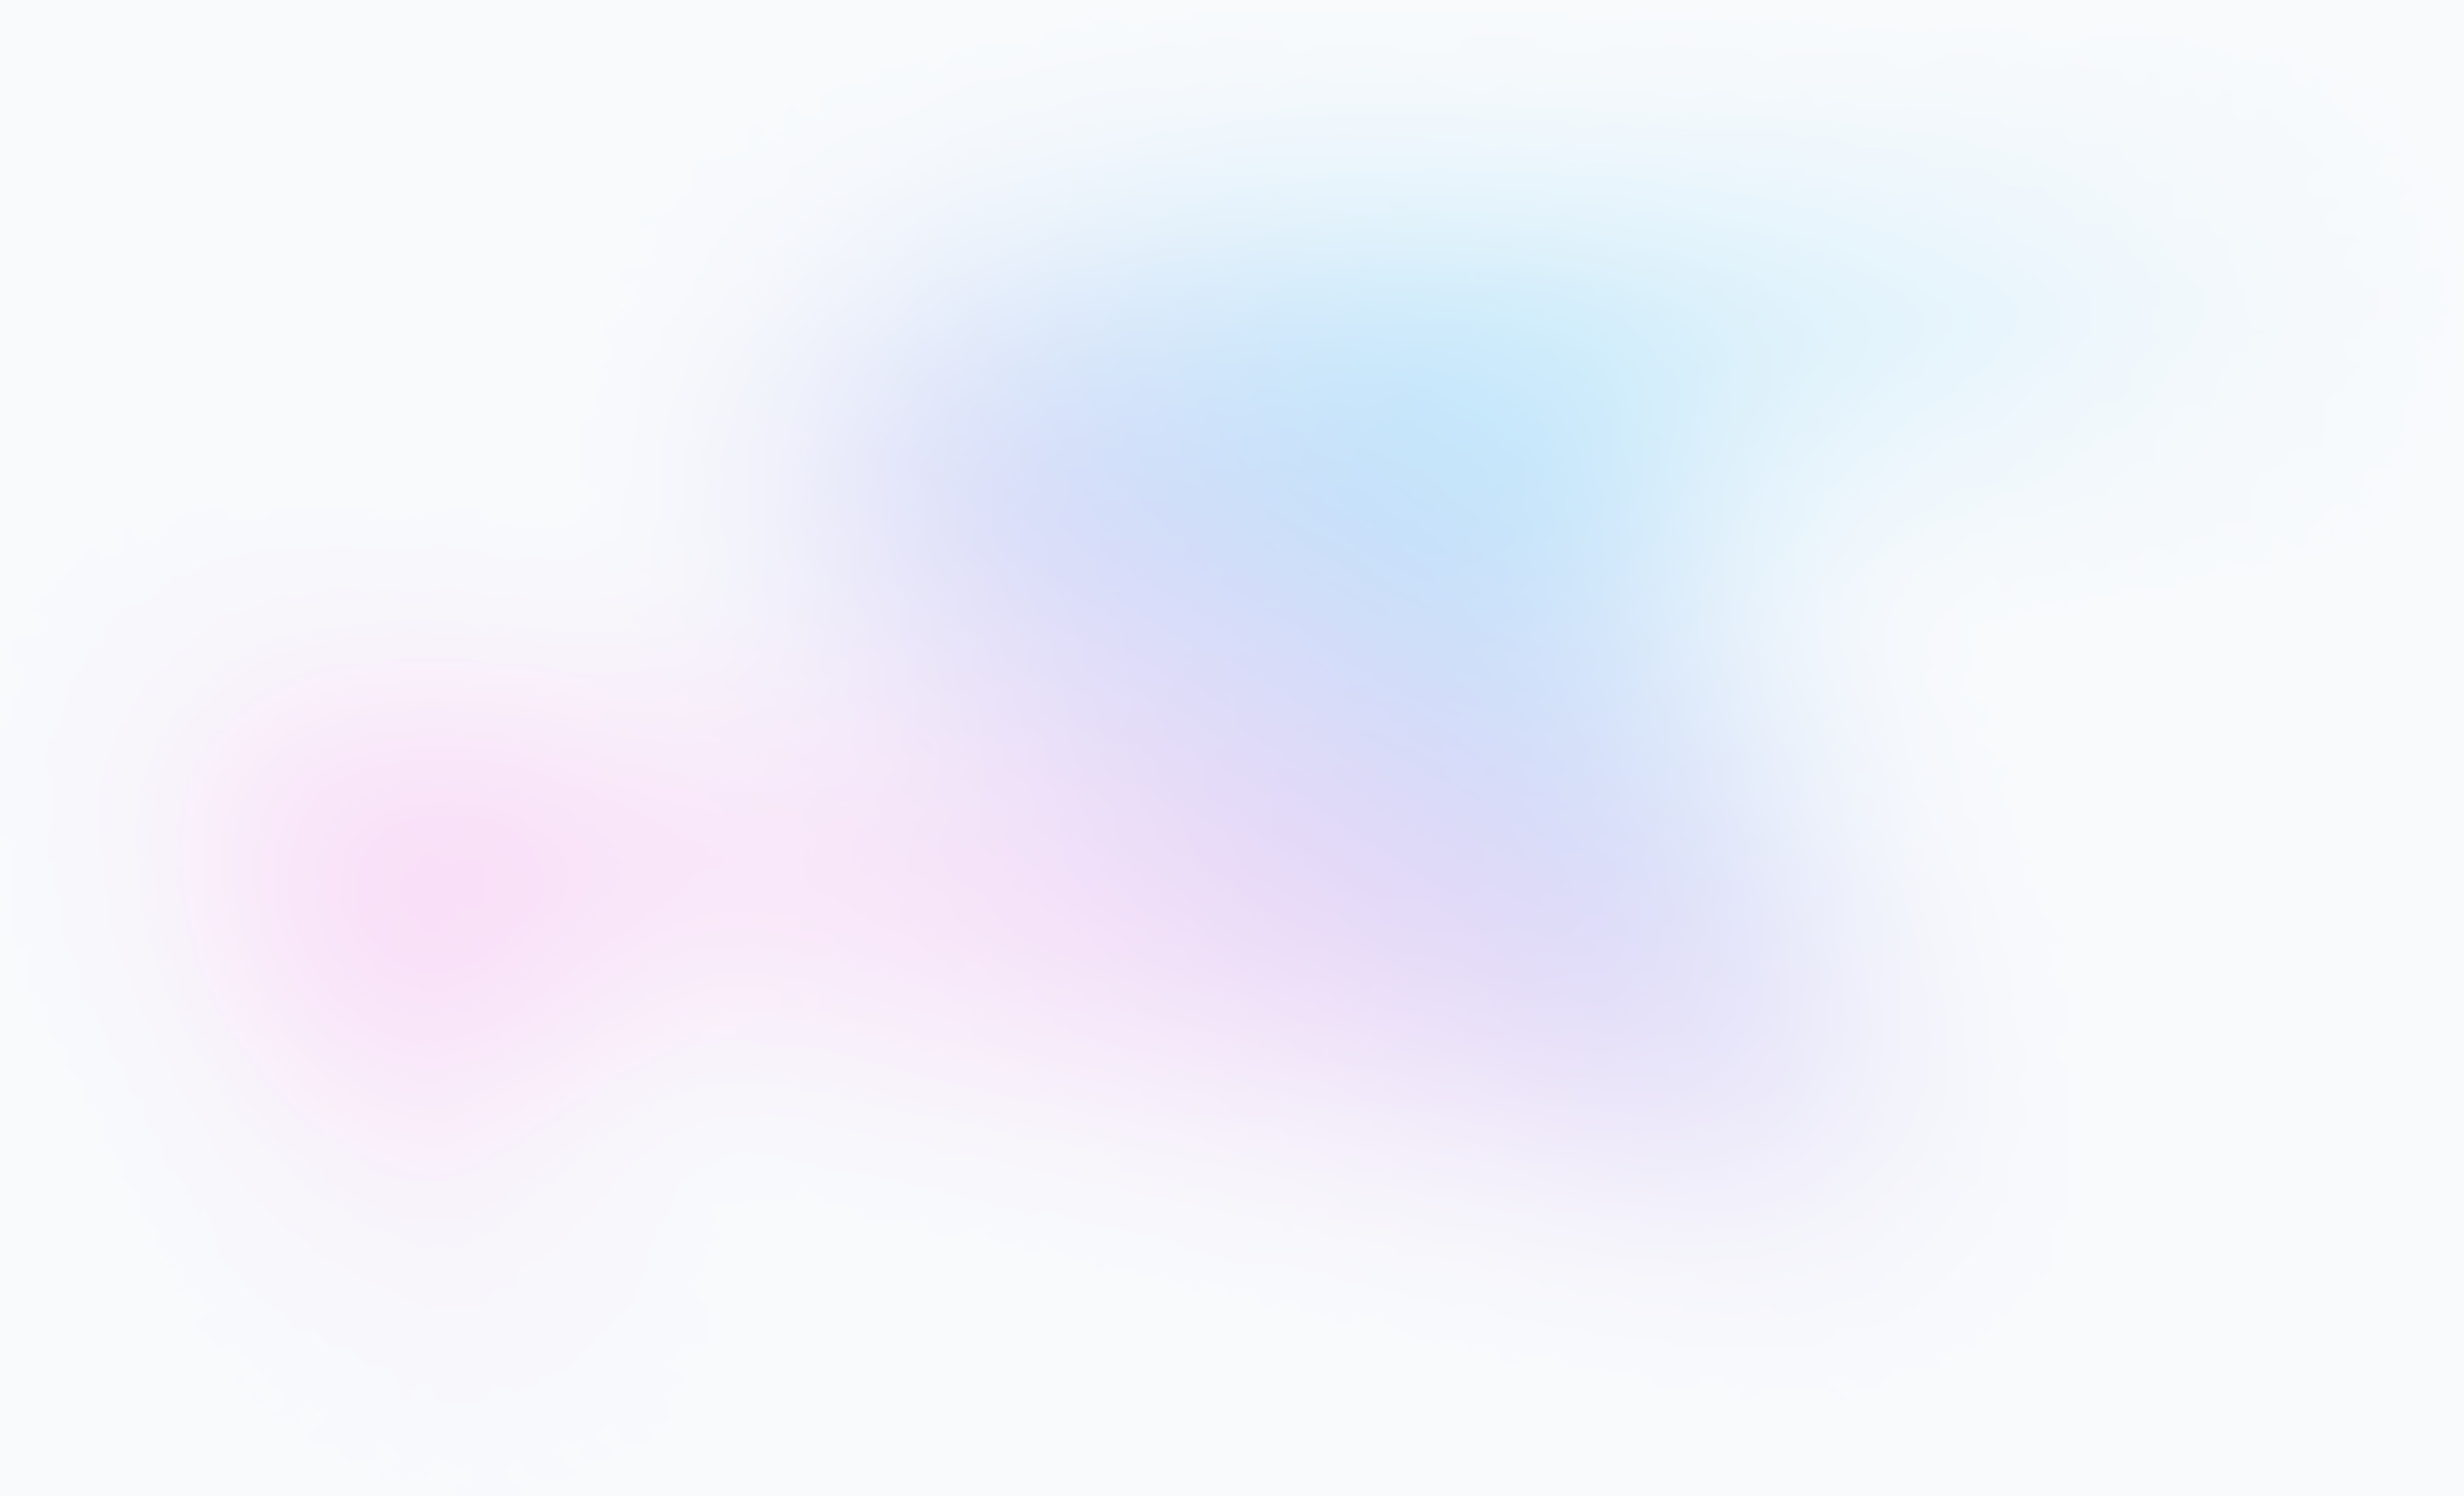 A background gradient image with shades of pink and light blue.